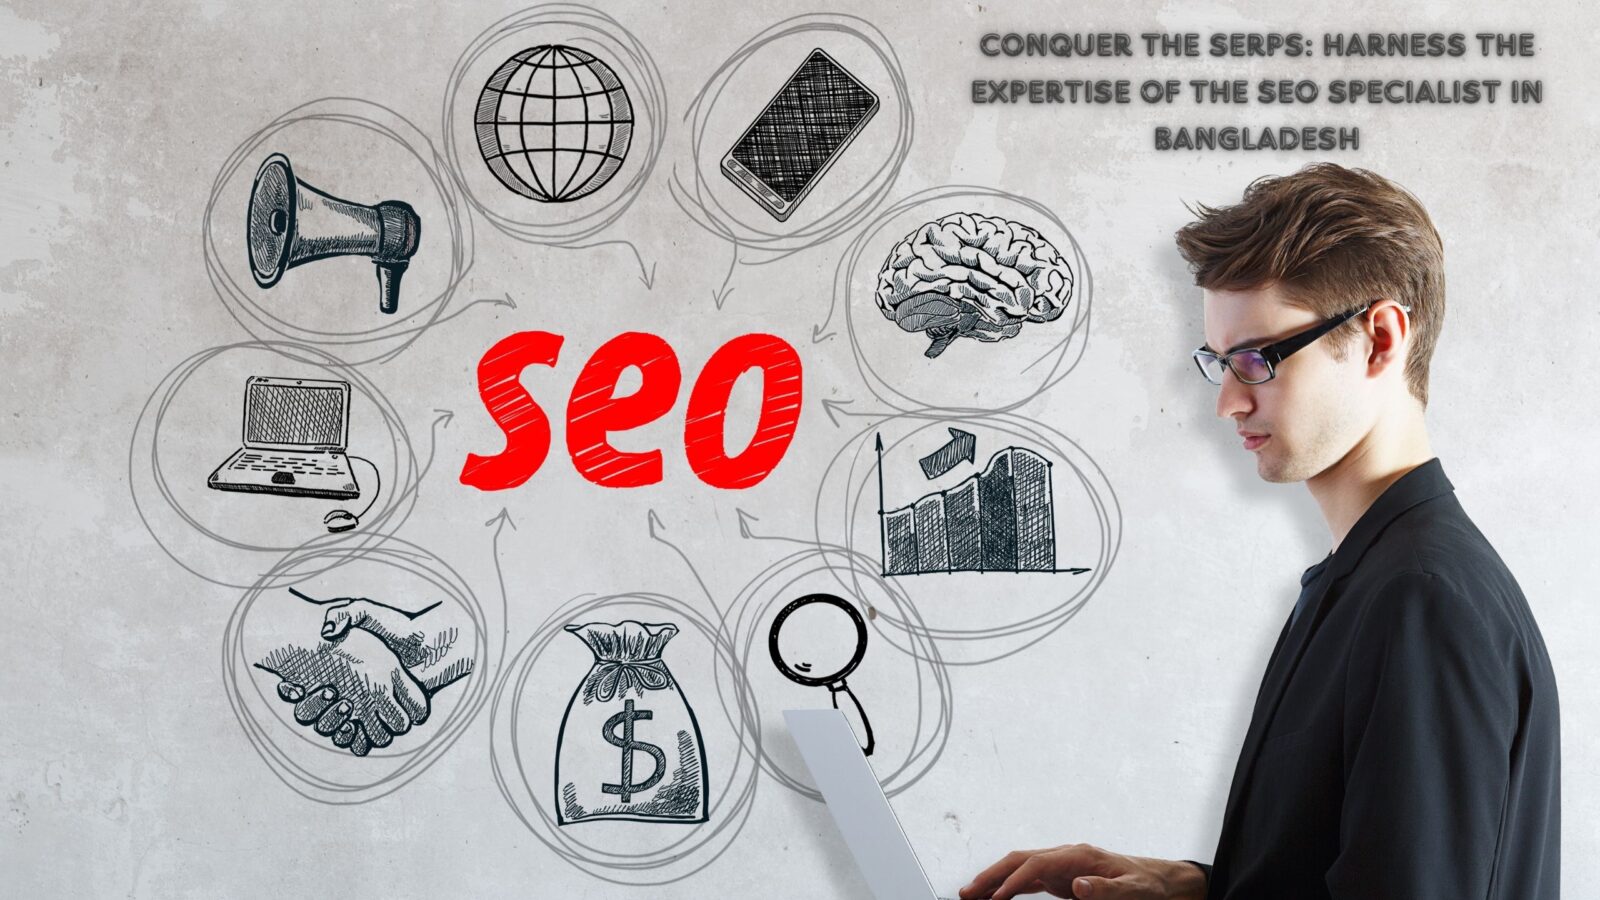 Conquer the SERPs: Harness the Expertise of the SEO Specialist in Bangladesh